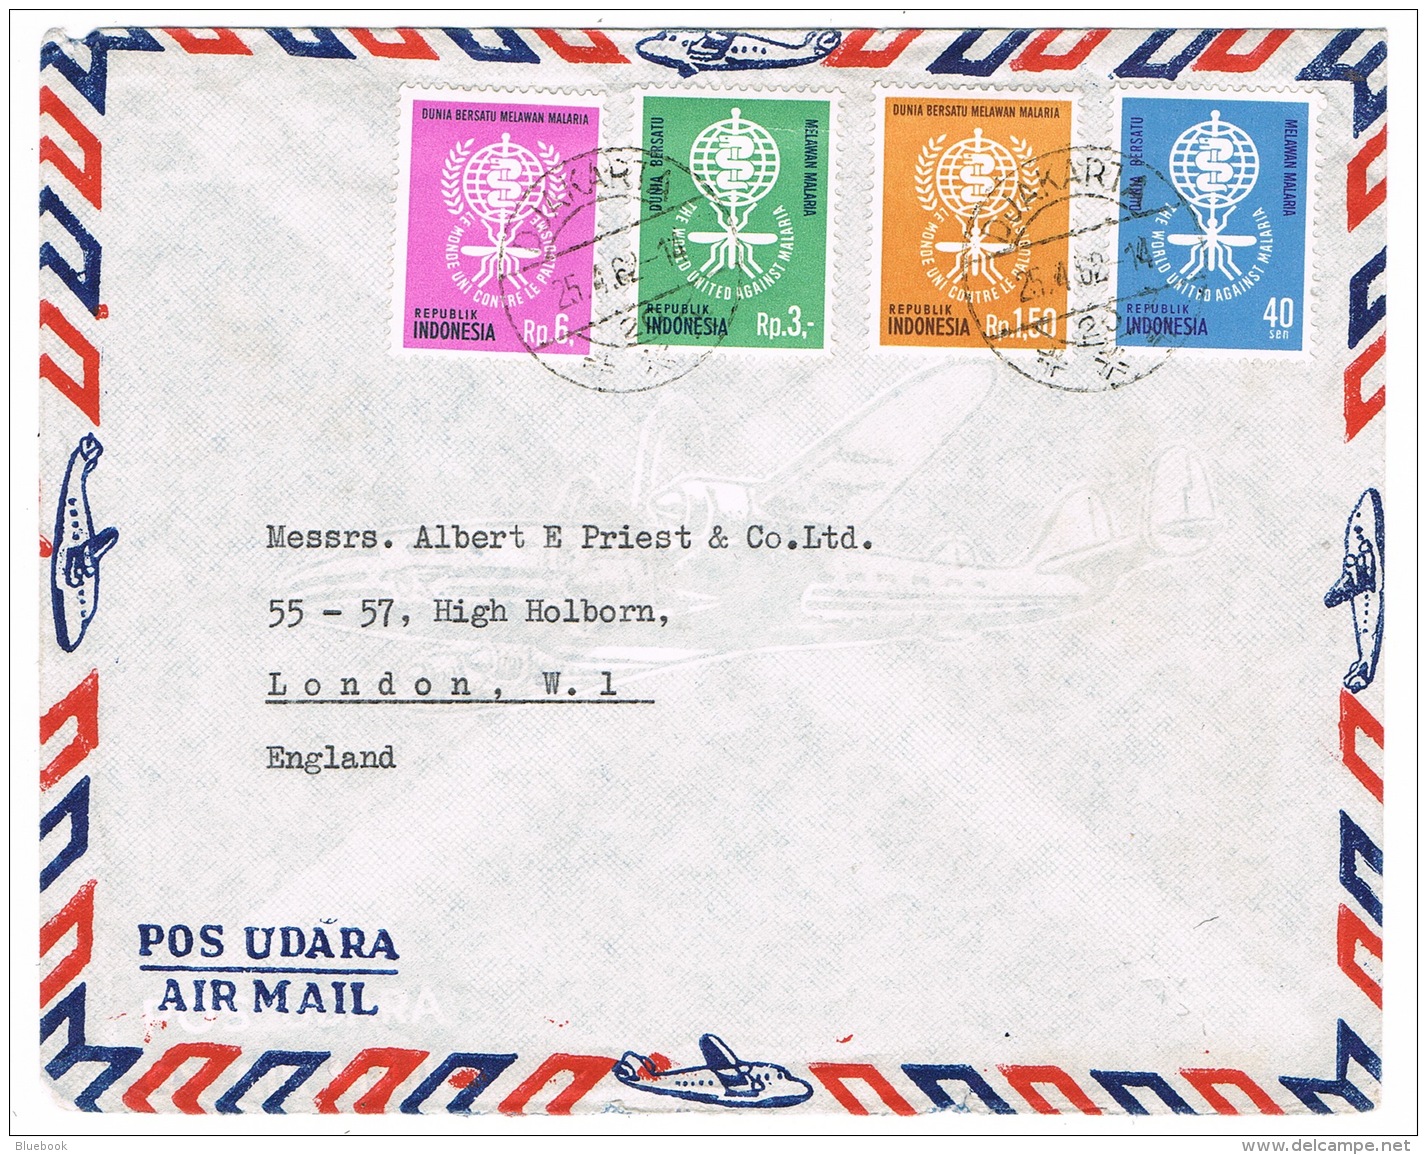 RB 1159 - 1962 Airmail Cover Indonesia To London - SG 927-930 - Malaria Health Theme - Indonesia